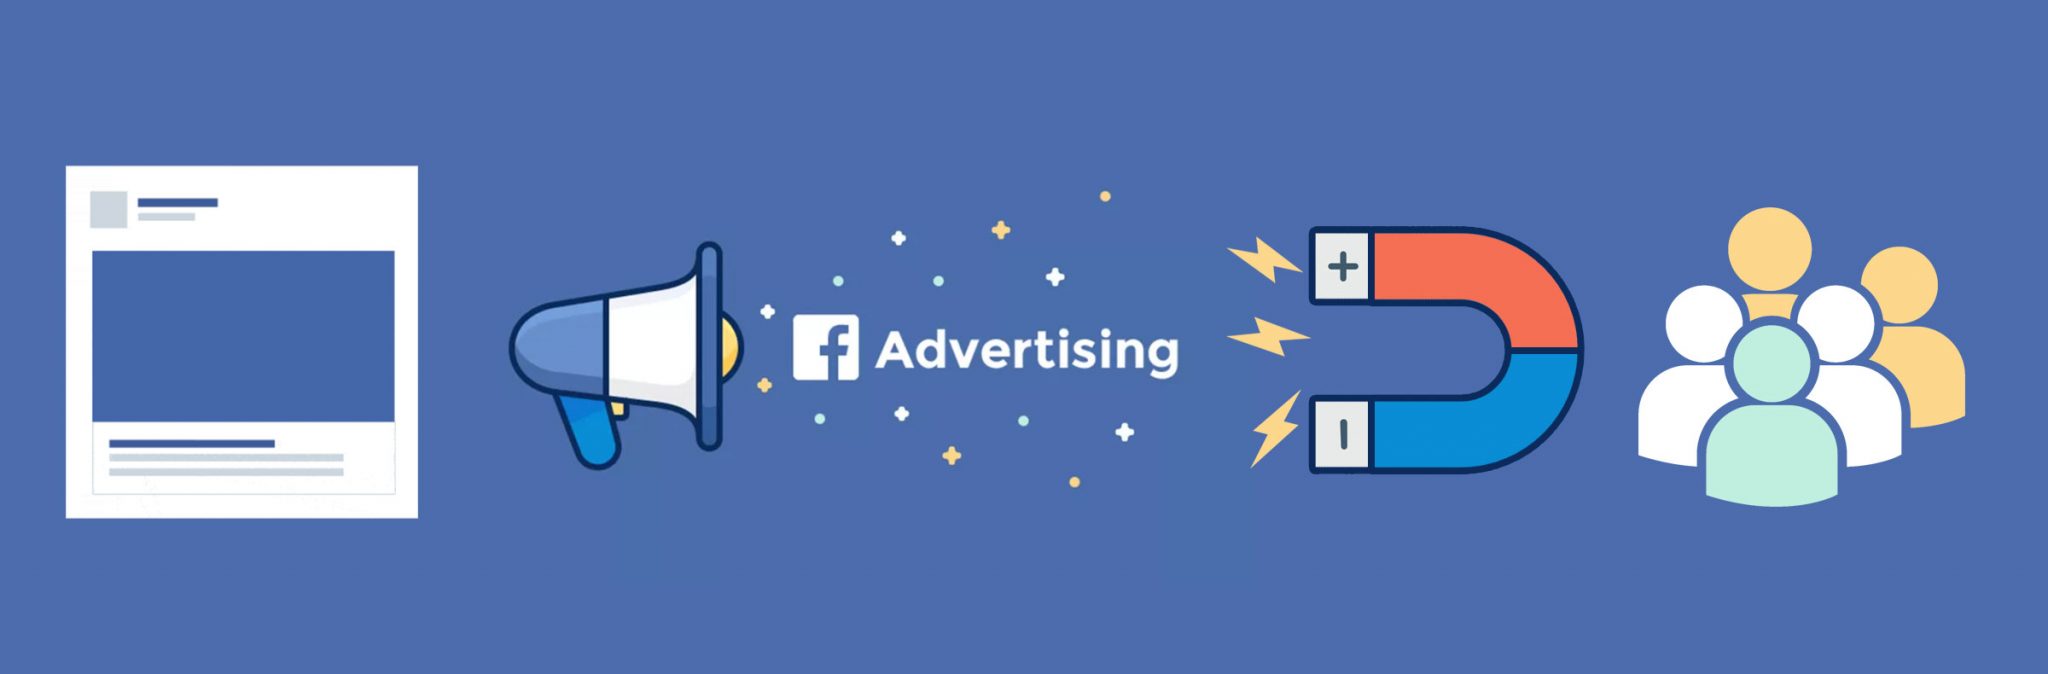 Facebook advertising for lead generation